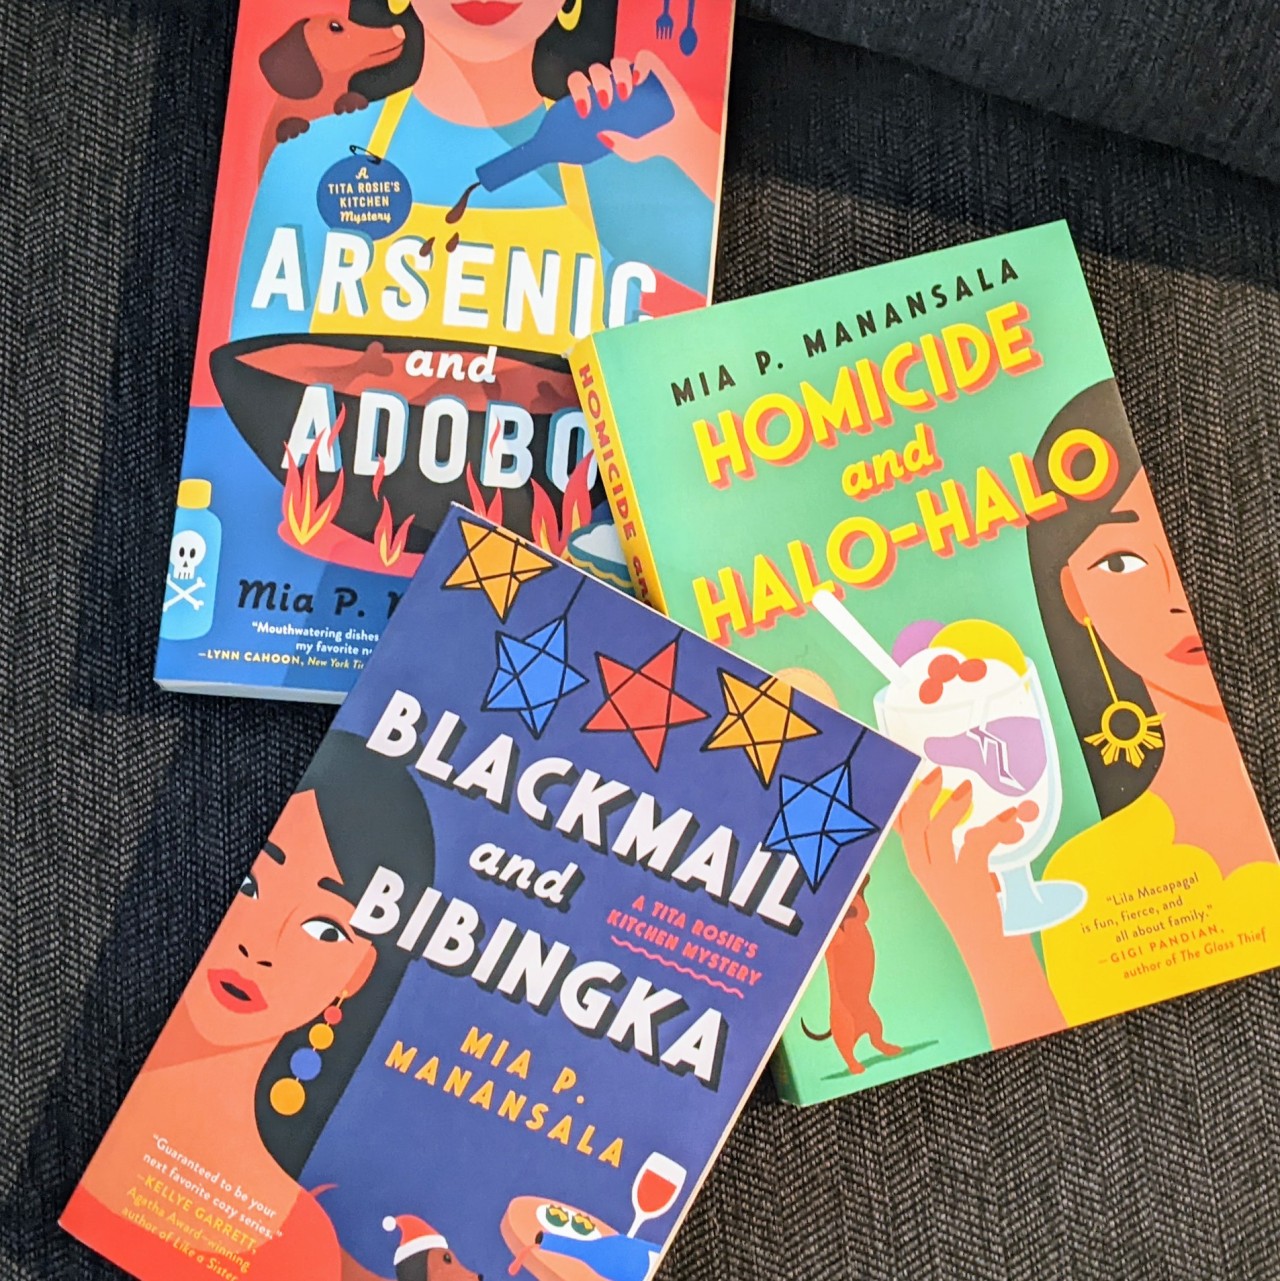 A photo of three book covers for Mian P. Manansala's mystery novels, Arsenic and Adobo, Homicide and Halo-Halo, and Blackmail and Bibingka.